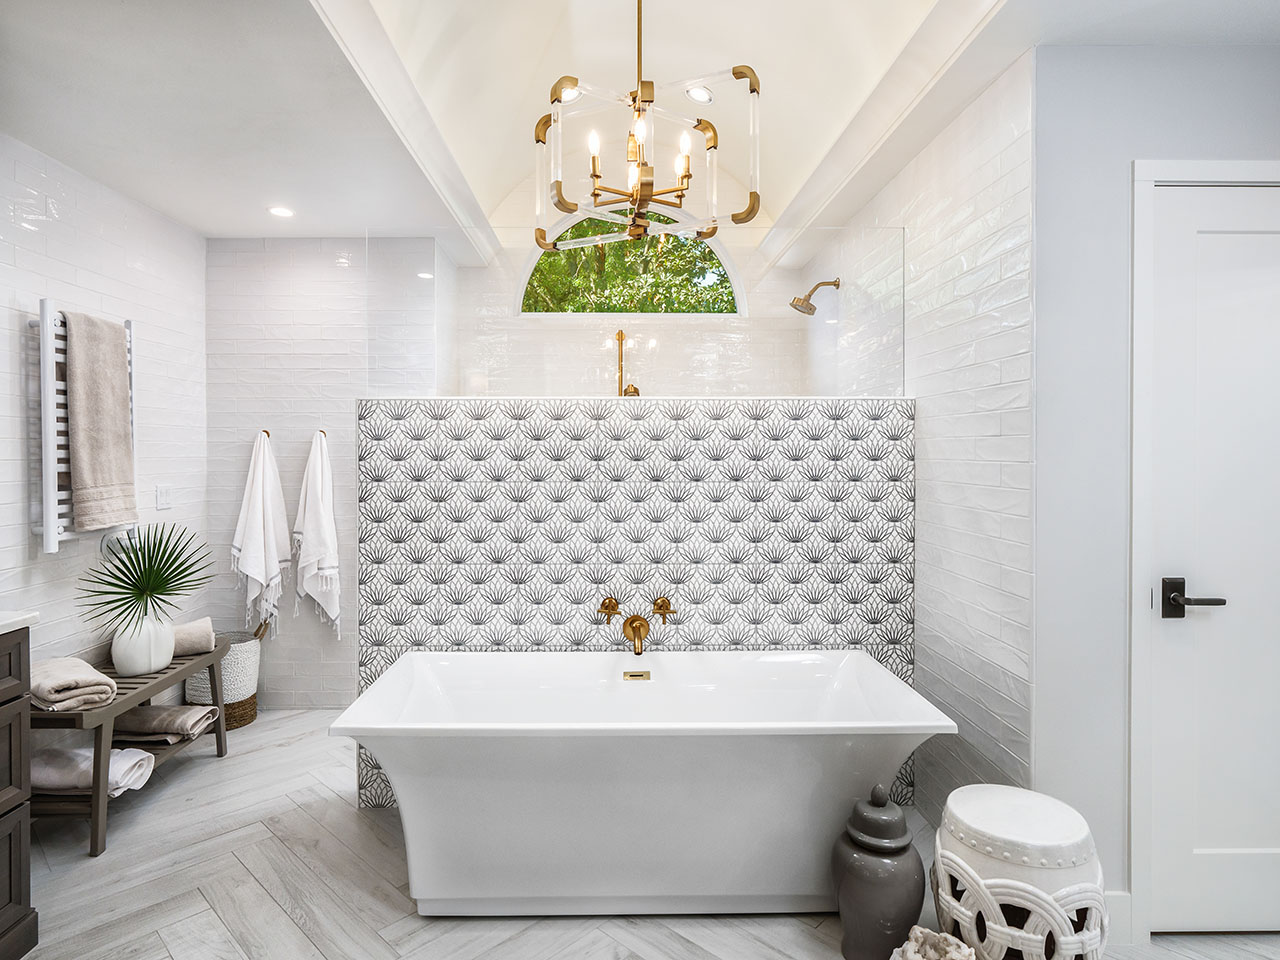 Create a Home Spa With Your Bathroom Design